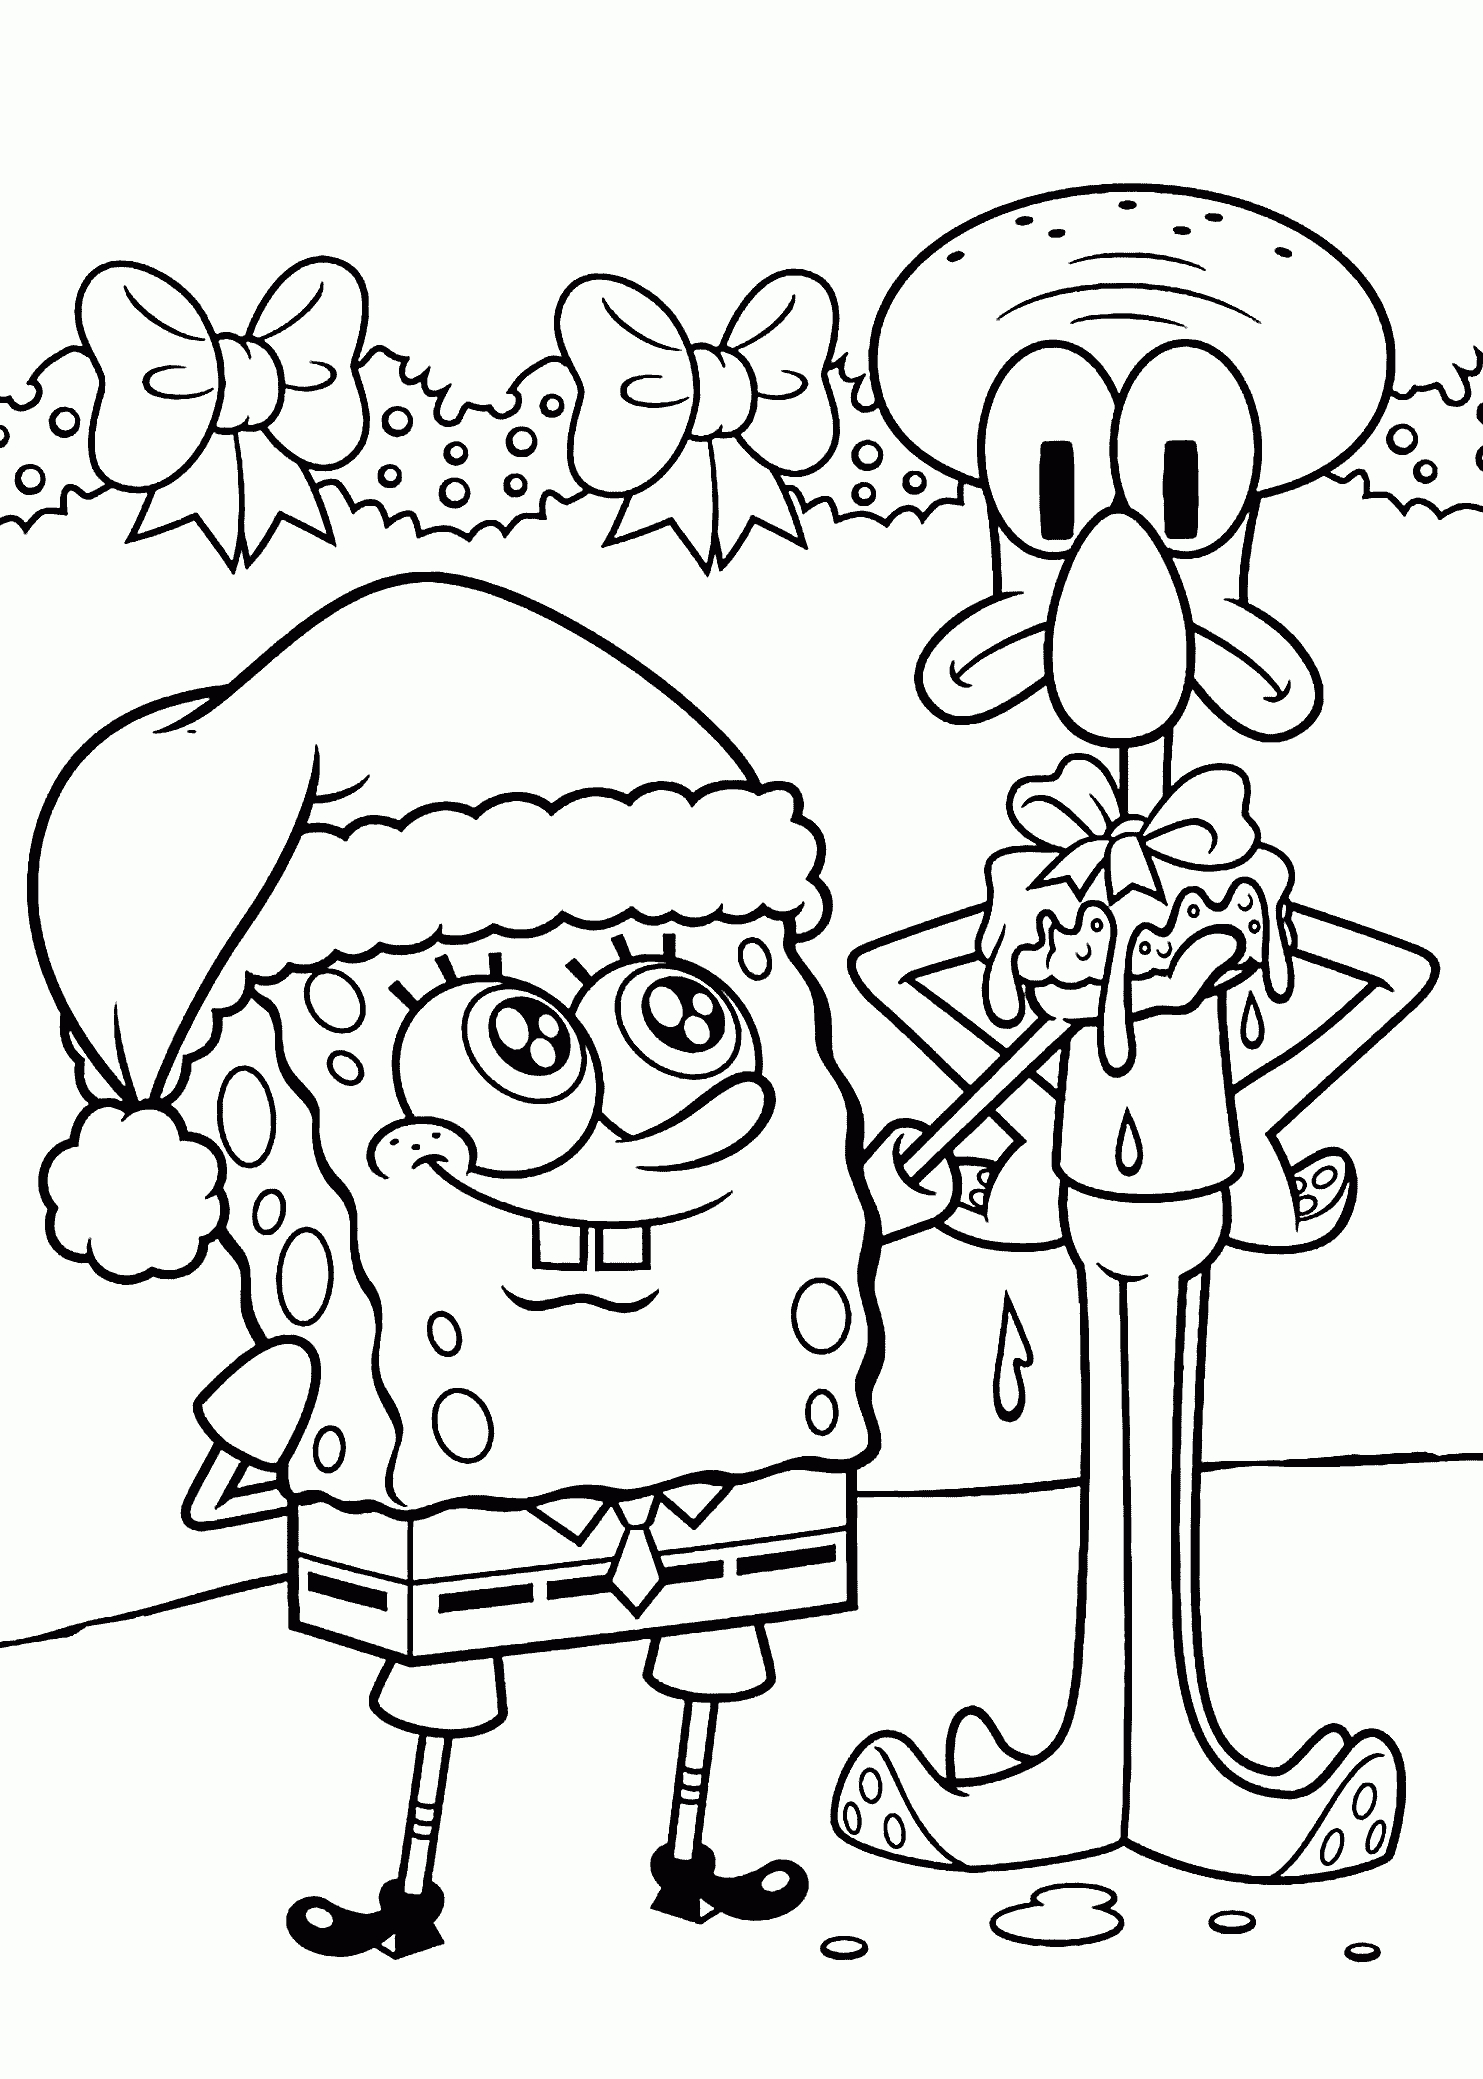 Spongebob And Squidward Coloring Pages For Kids, Printable Free - Free Printable Christmas Cartoon Coloring Pages